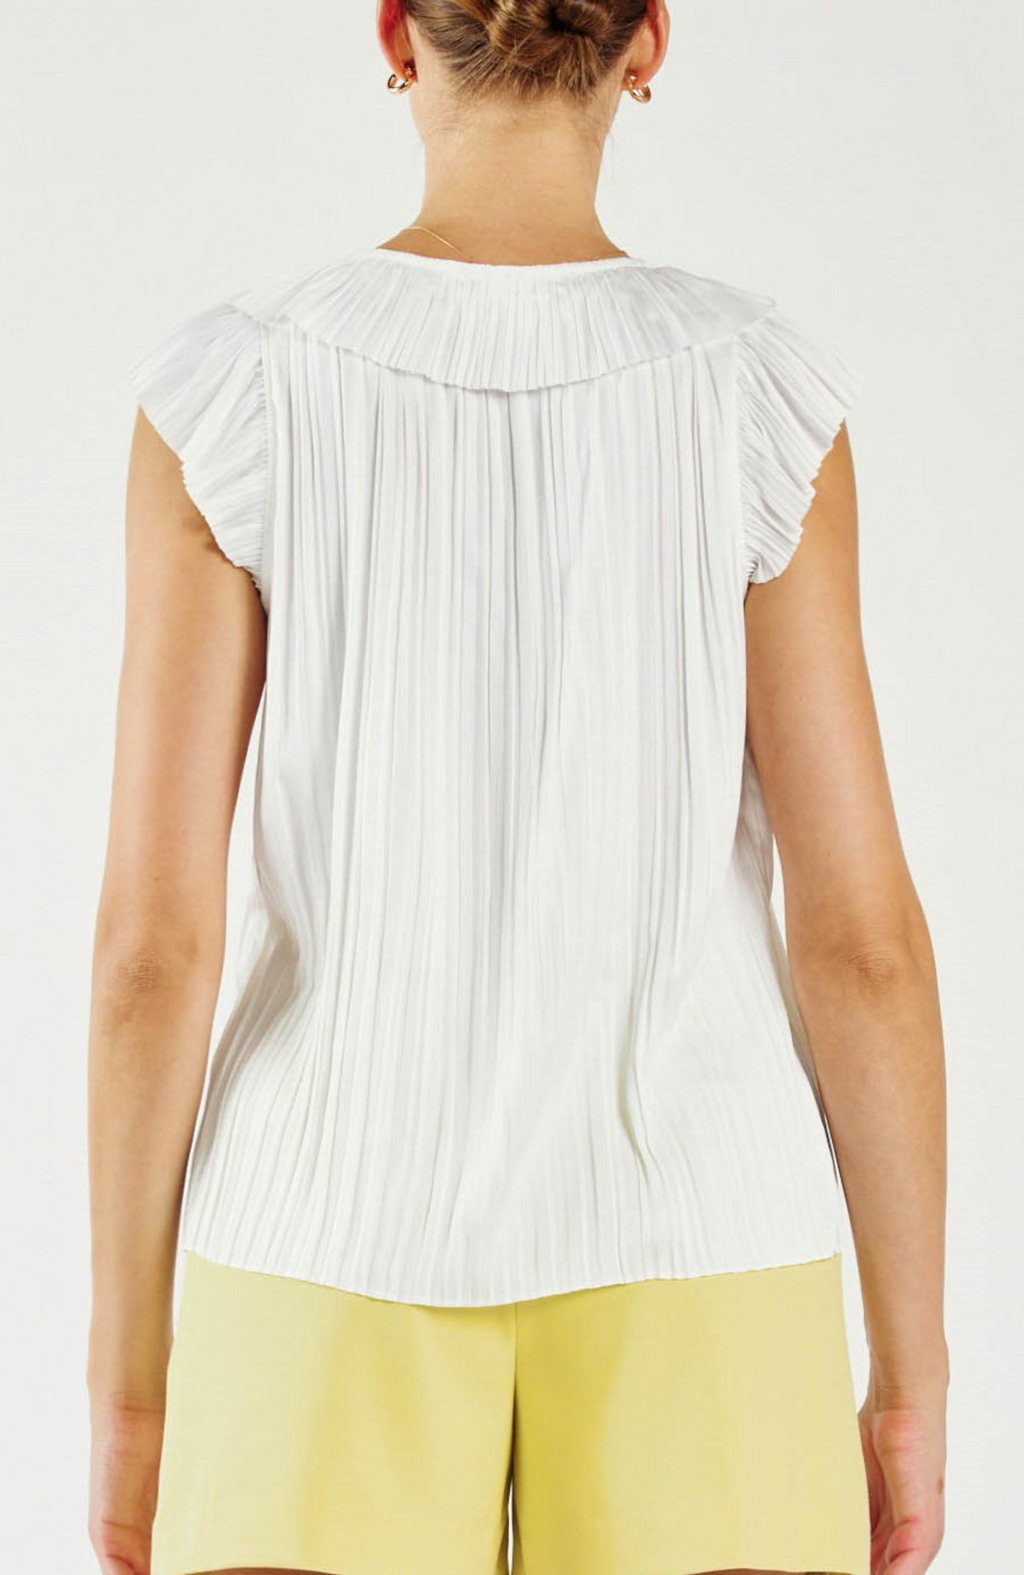 Current Air -  Pleated Trim Top